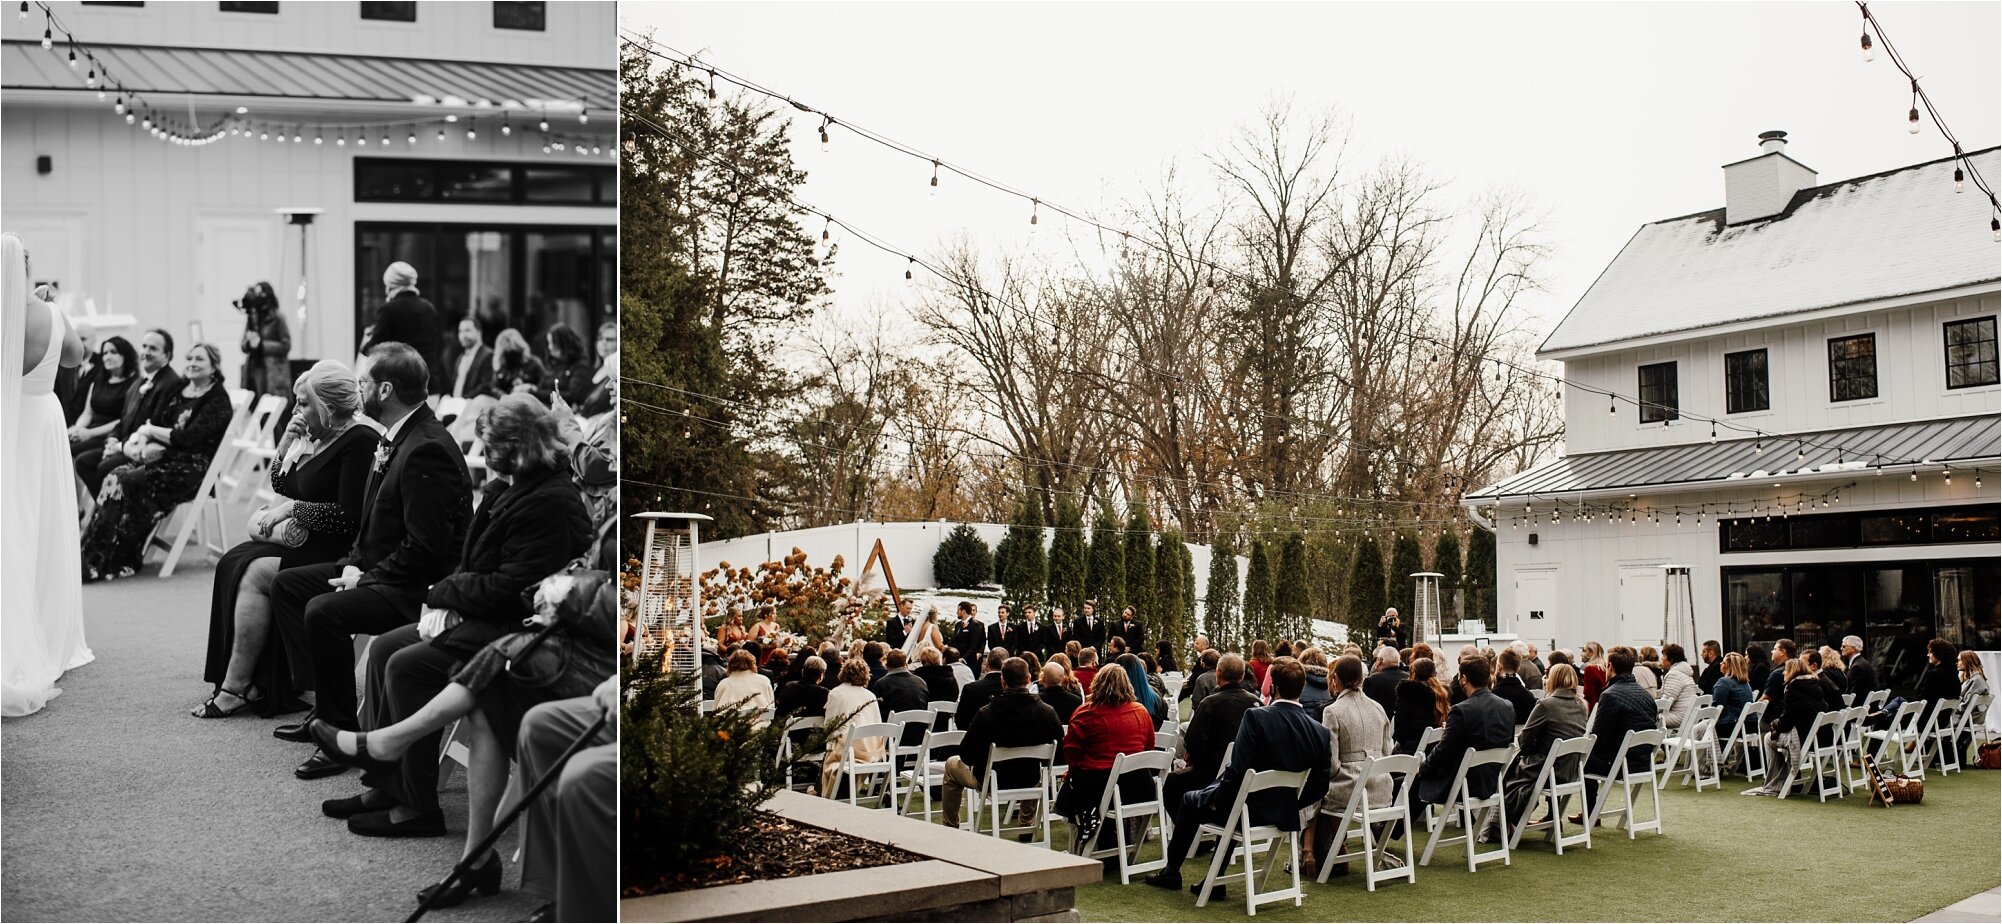  ceremony for wedding at hutton house wedding venue in minnesota top midwest photographer 